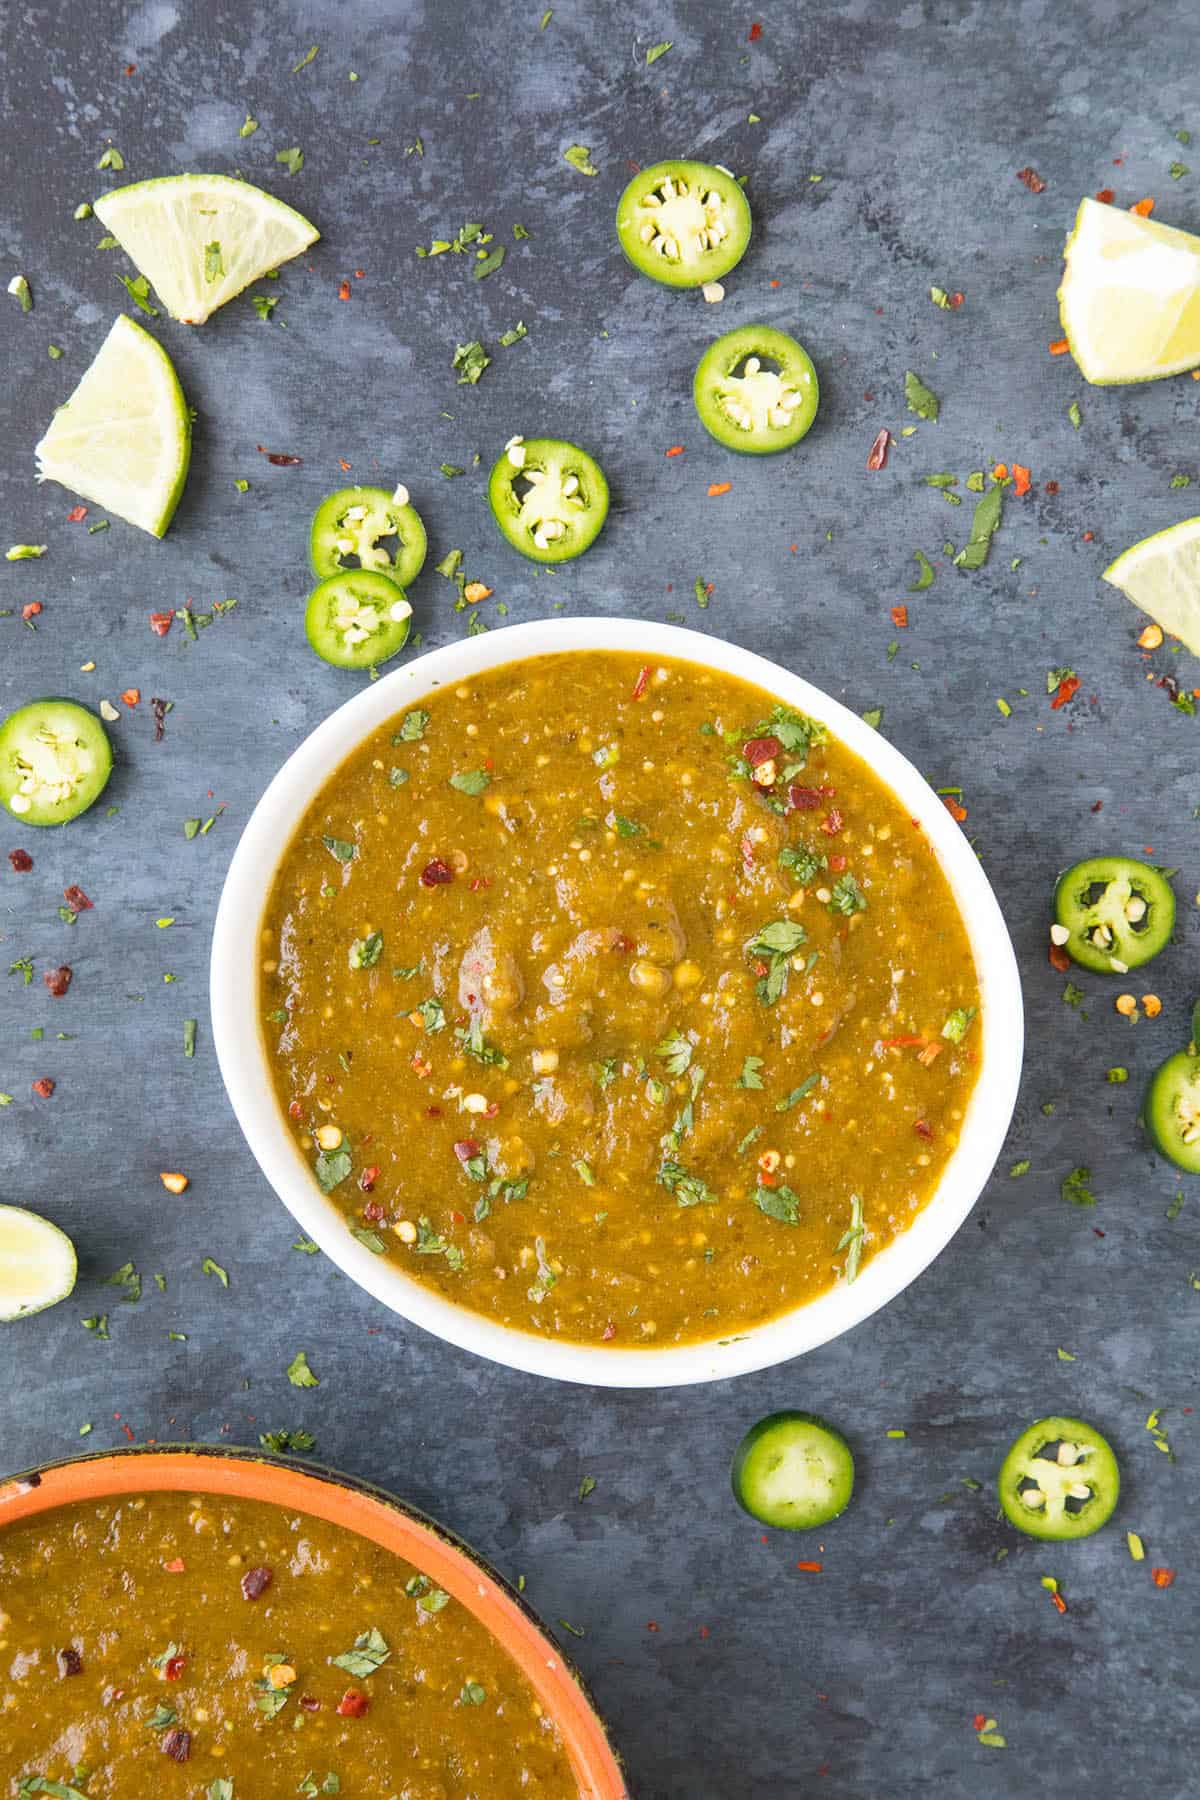 This green enchilada sauce is made with roasted tomatillos.